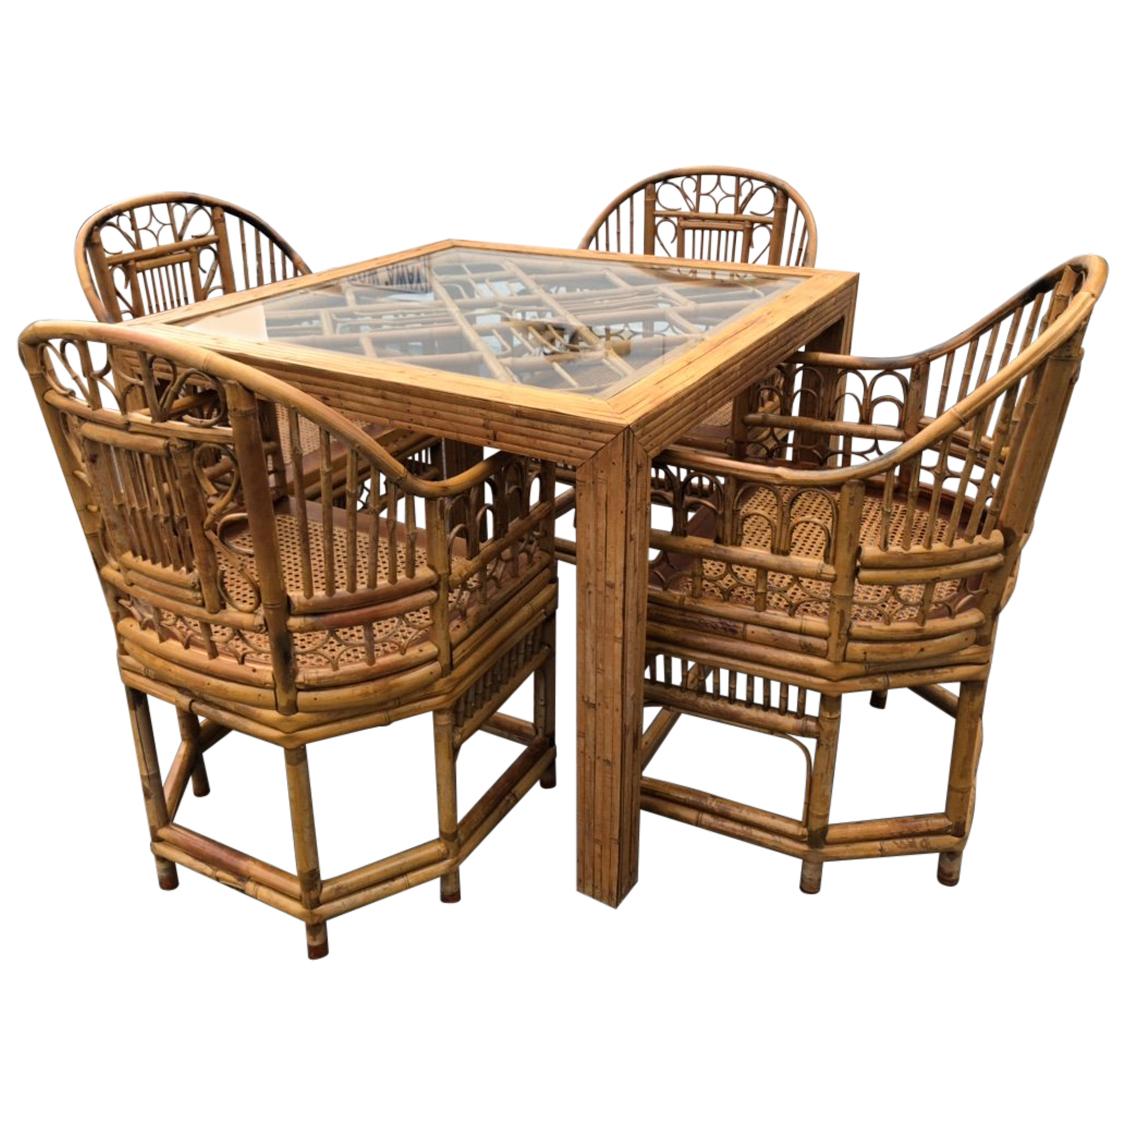 Vintage Rattan Bamboo Game Dining Table and Four Chairs Brighton Style